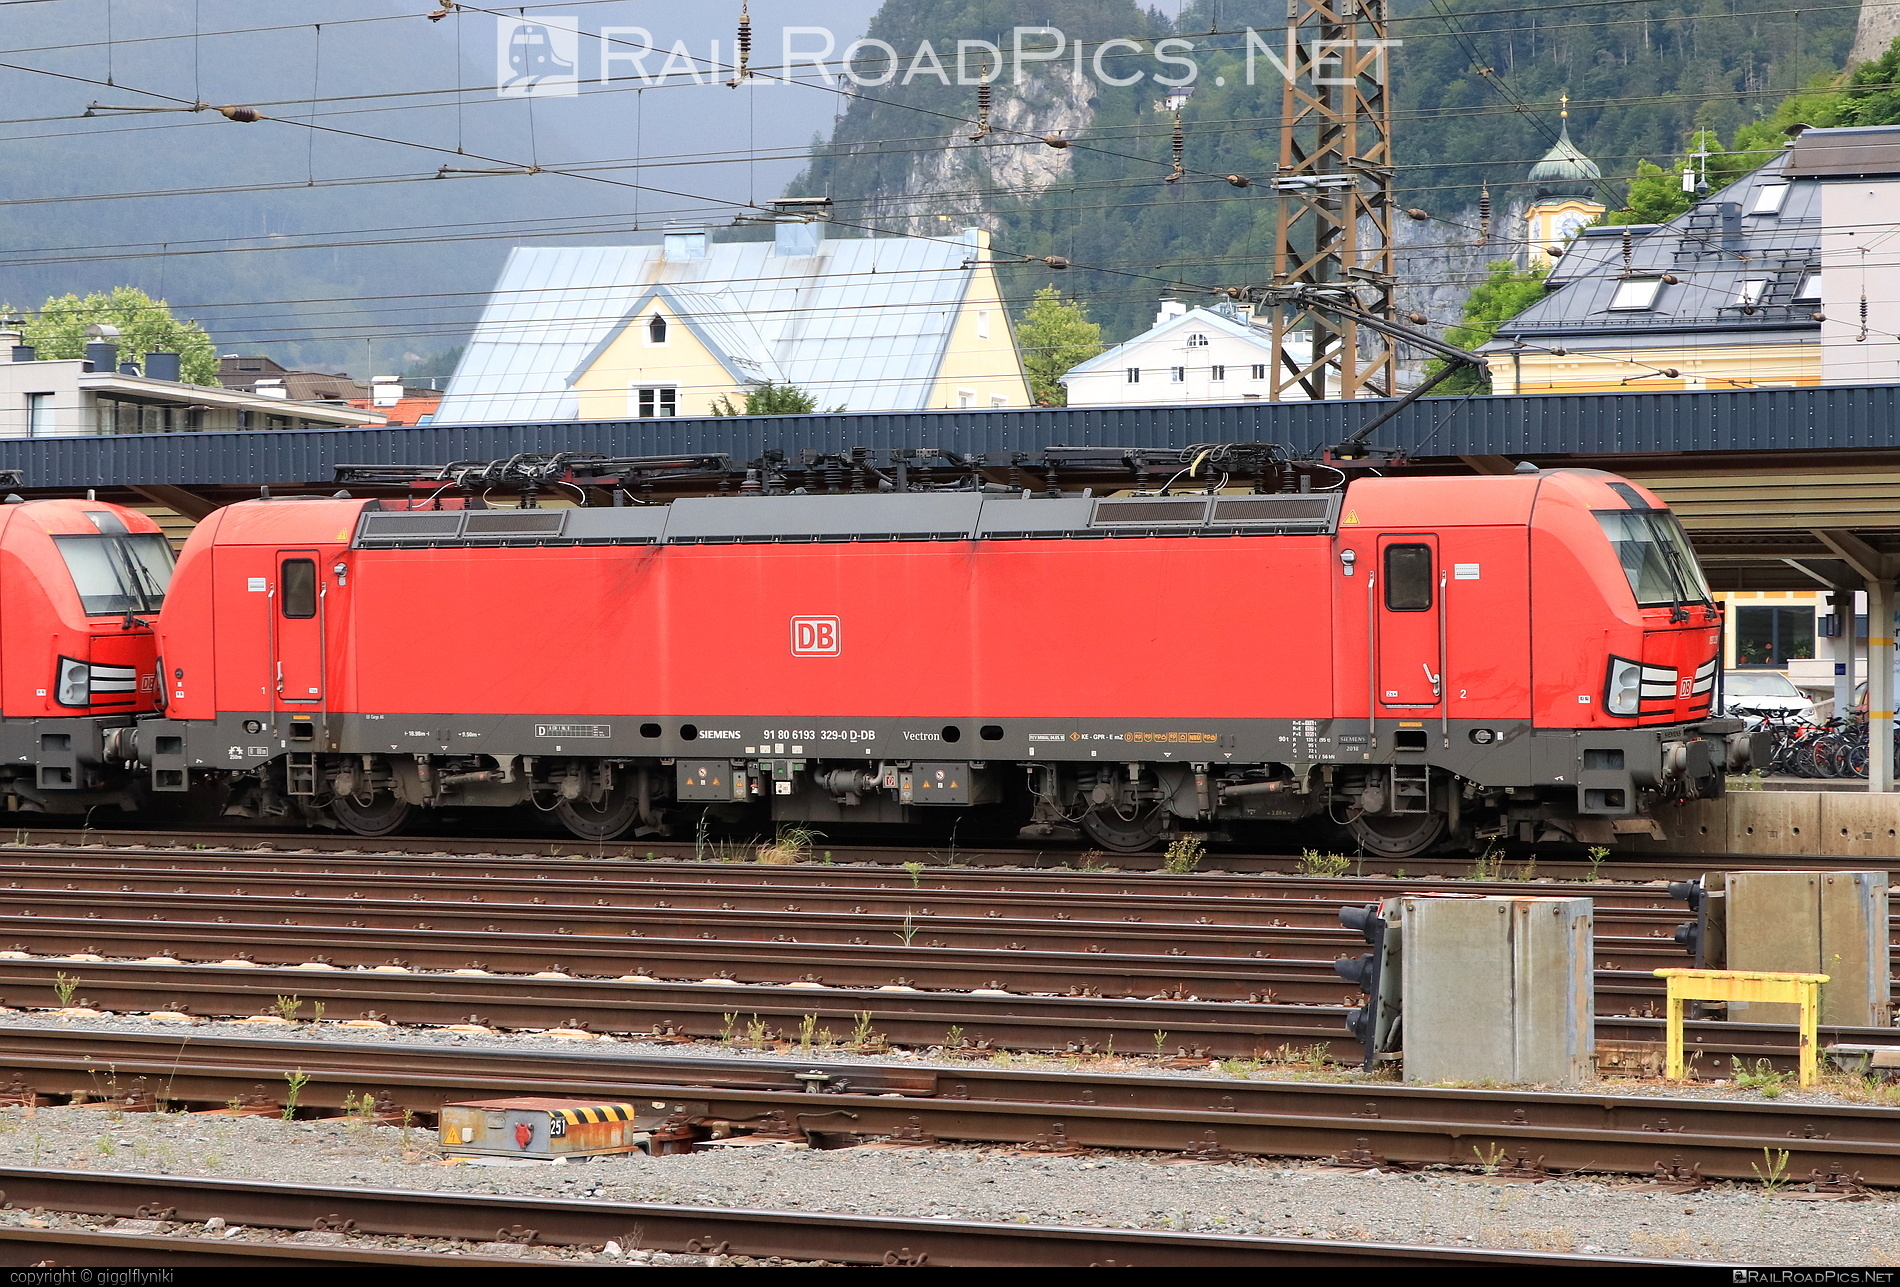 Siemens Vectron MS - 193 329 operated by DB Cargo AG #db #dbcargo #dbcargoag #deutschebahn #siemens #siemensVectron #siemensVectronMS #vectron #vectronMS